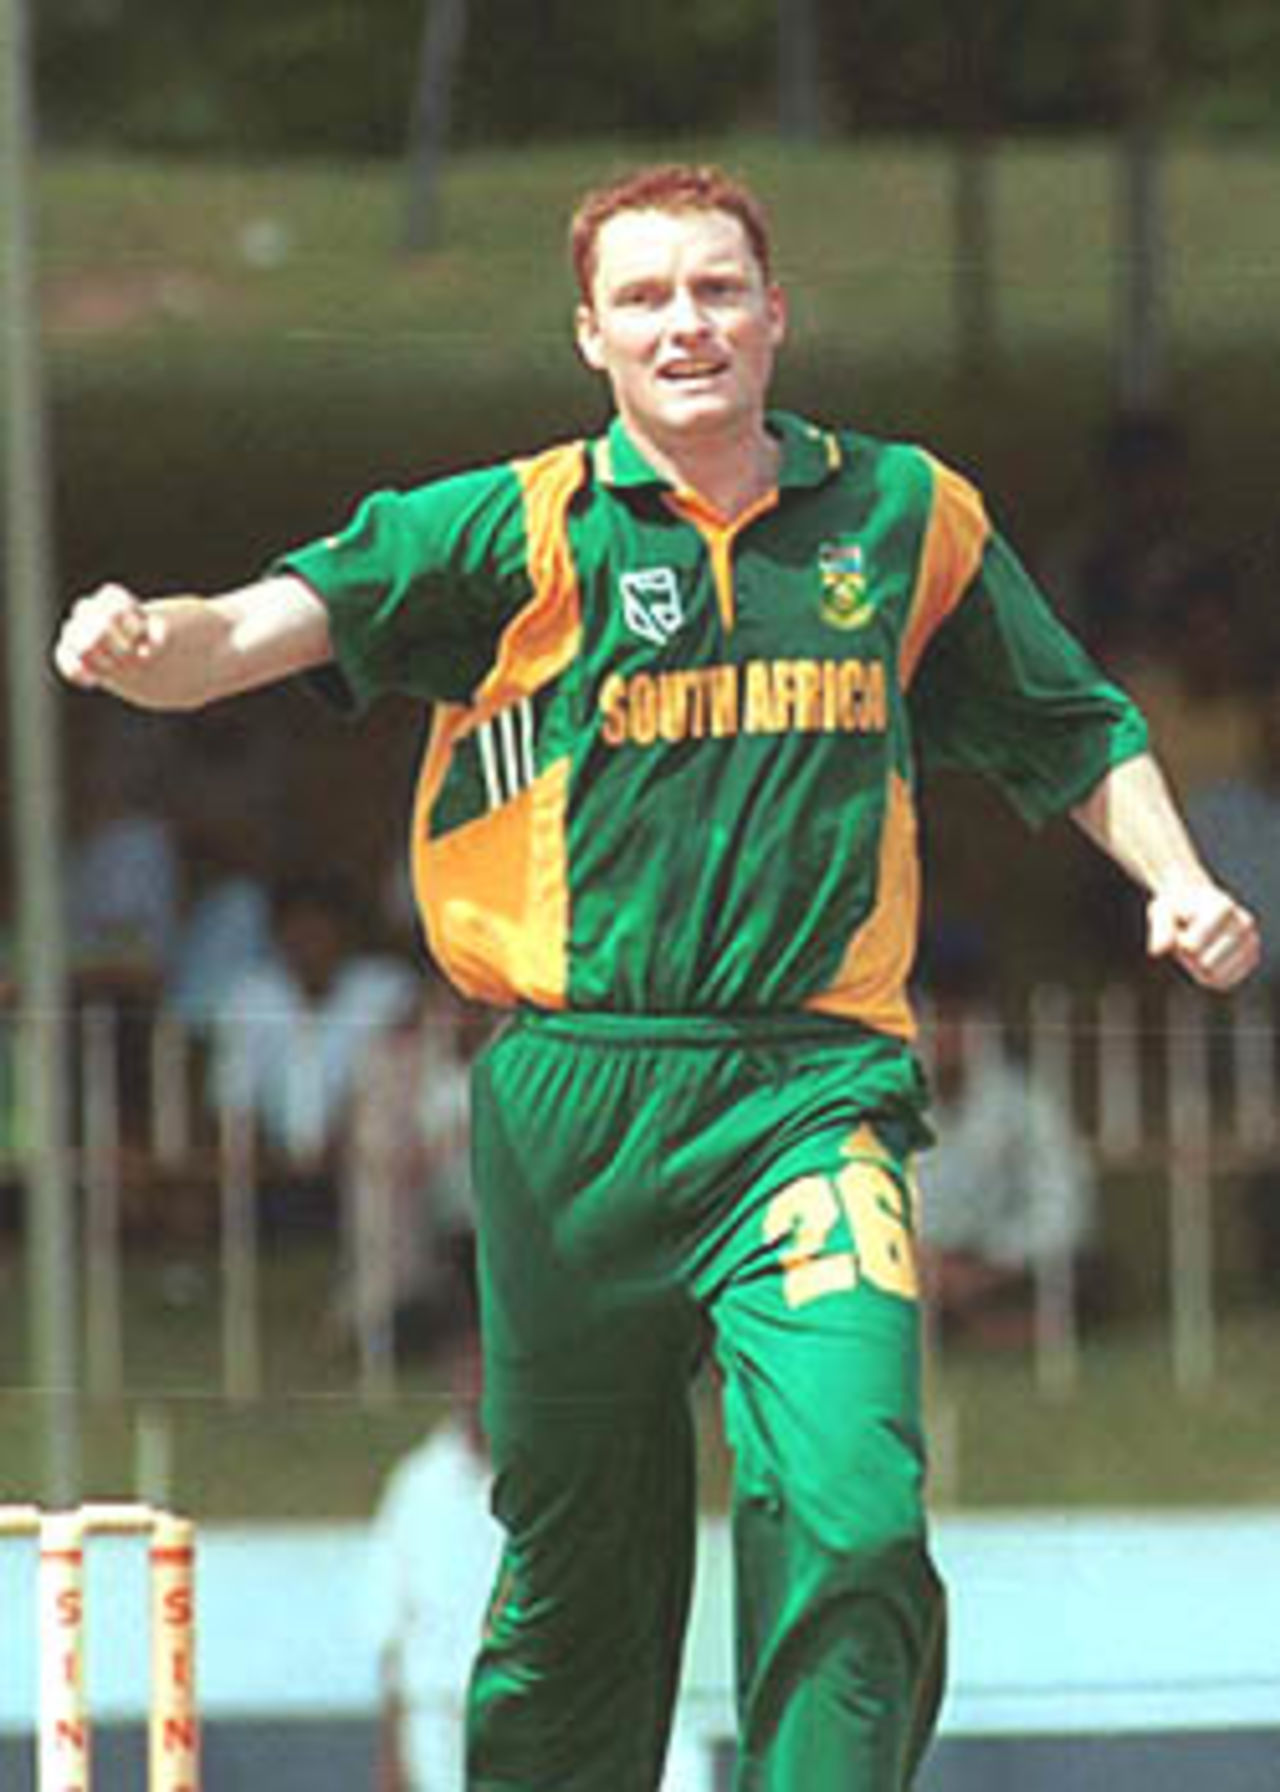 Terbrugge pumps his fist after picking up a Pakistani wicket. Singer Triangular Series, 2000/01, 6th Match, Pakistan v South Africa, Sinhalese Sports Club Ground, Colombo 12 July 2000.